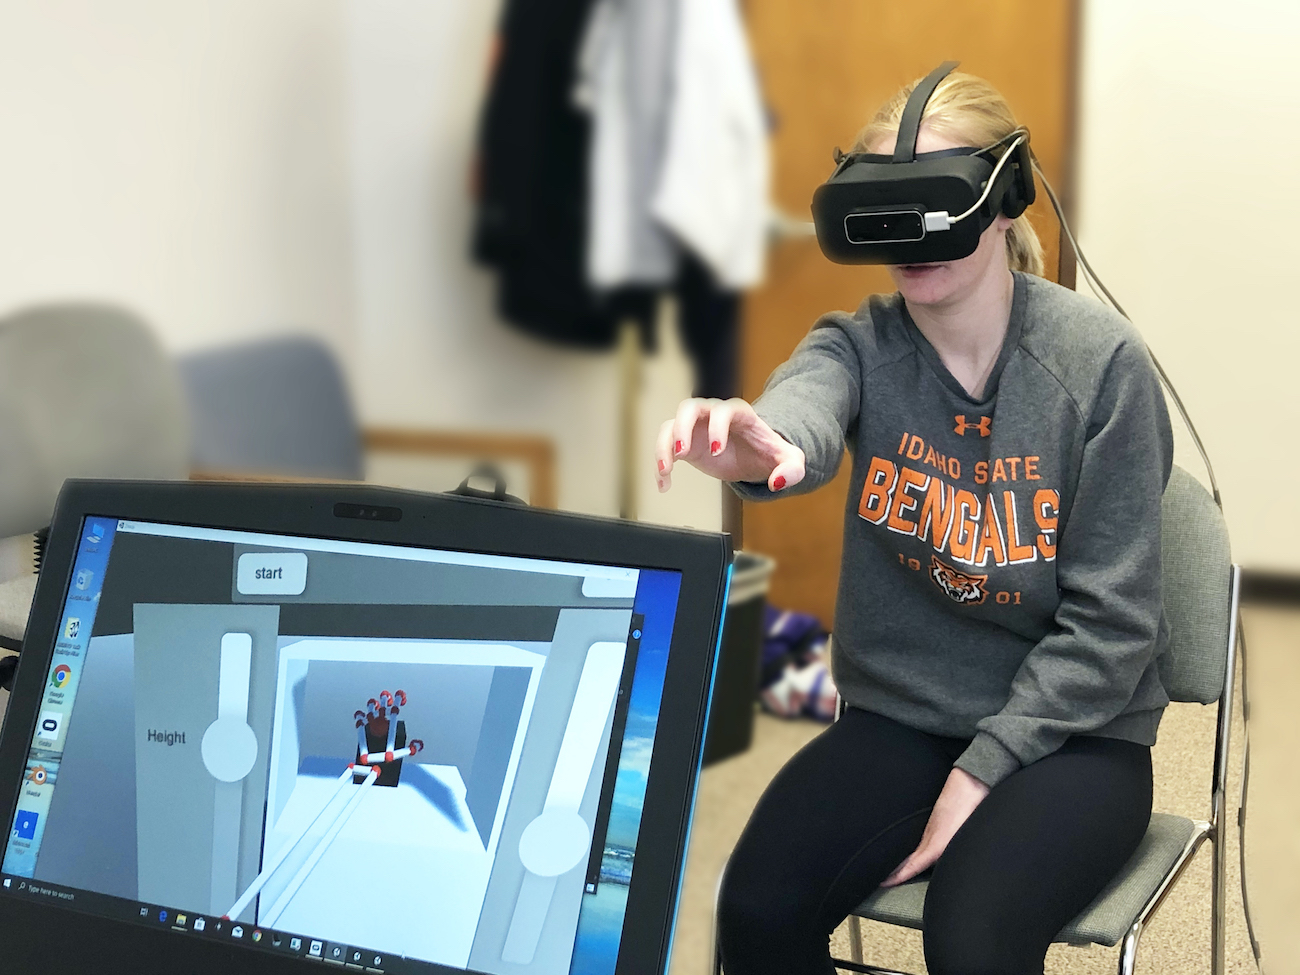 A volunteer, with virtual reality headset on, tests the virtual reality system that is pictured on a computer in the foreground.